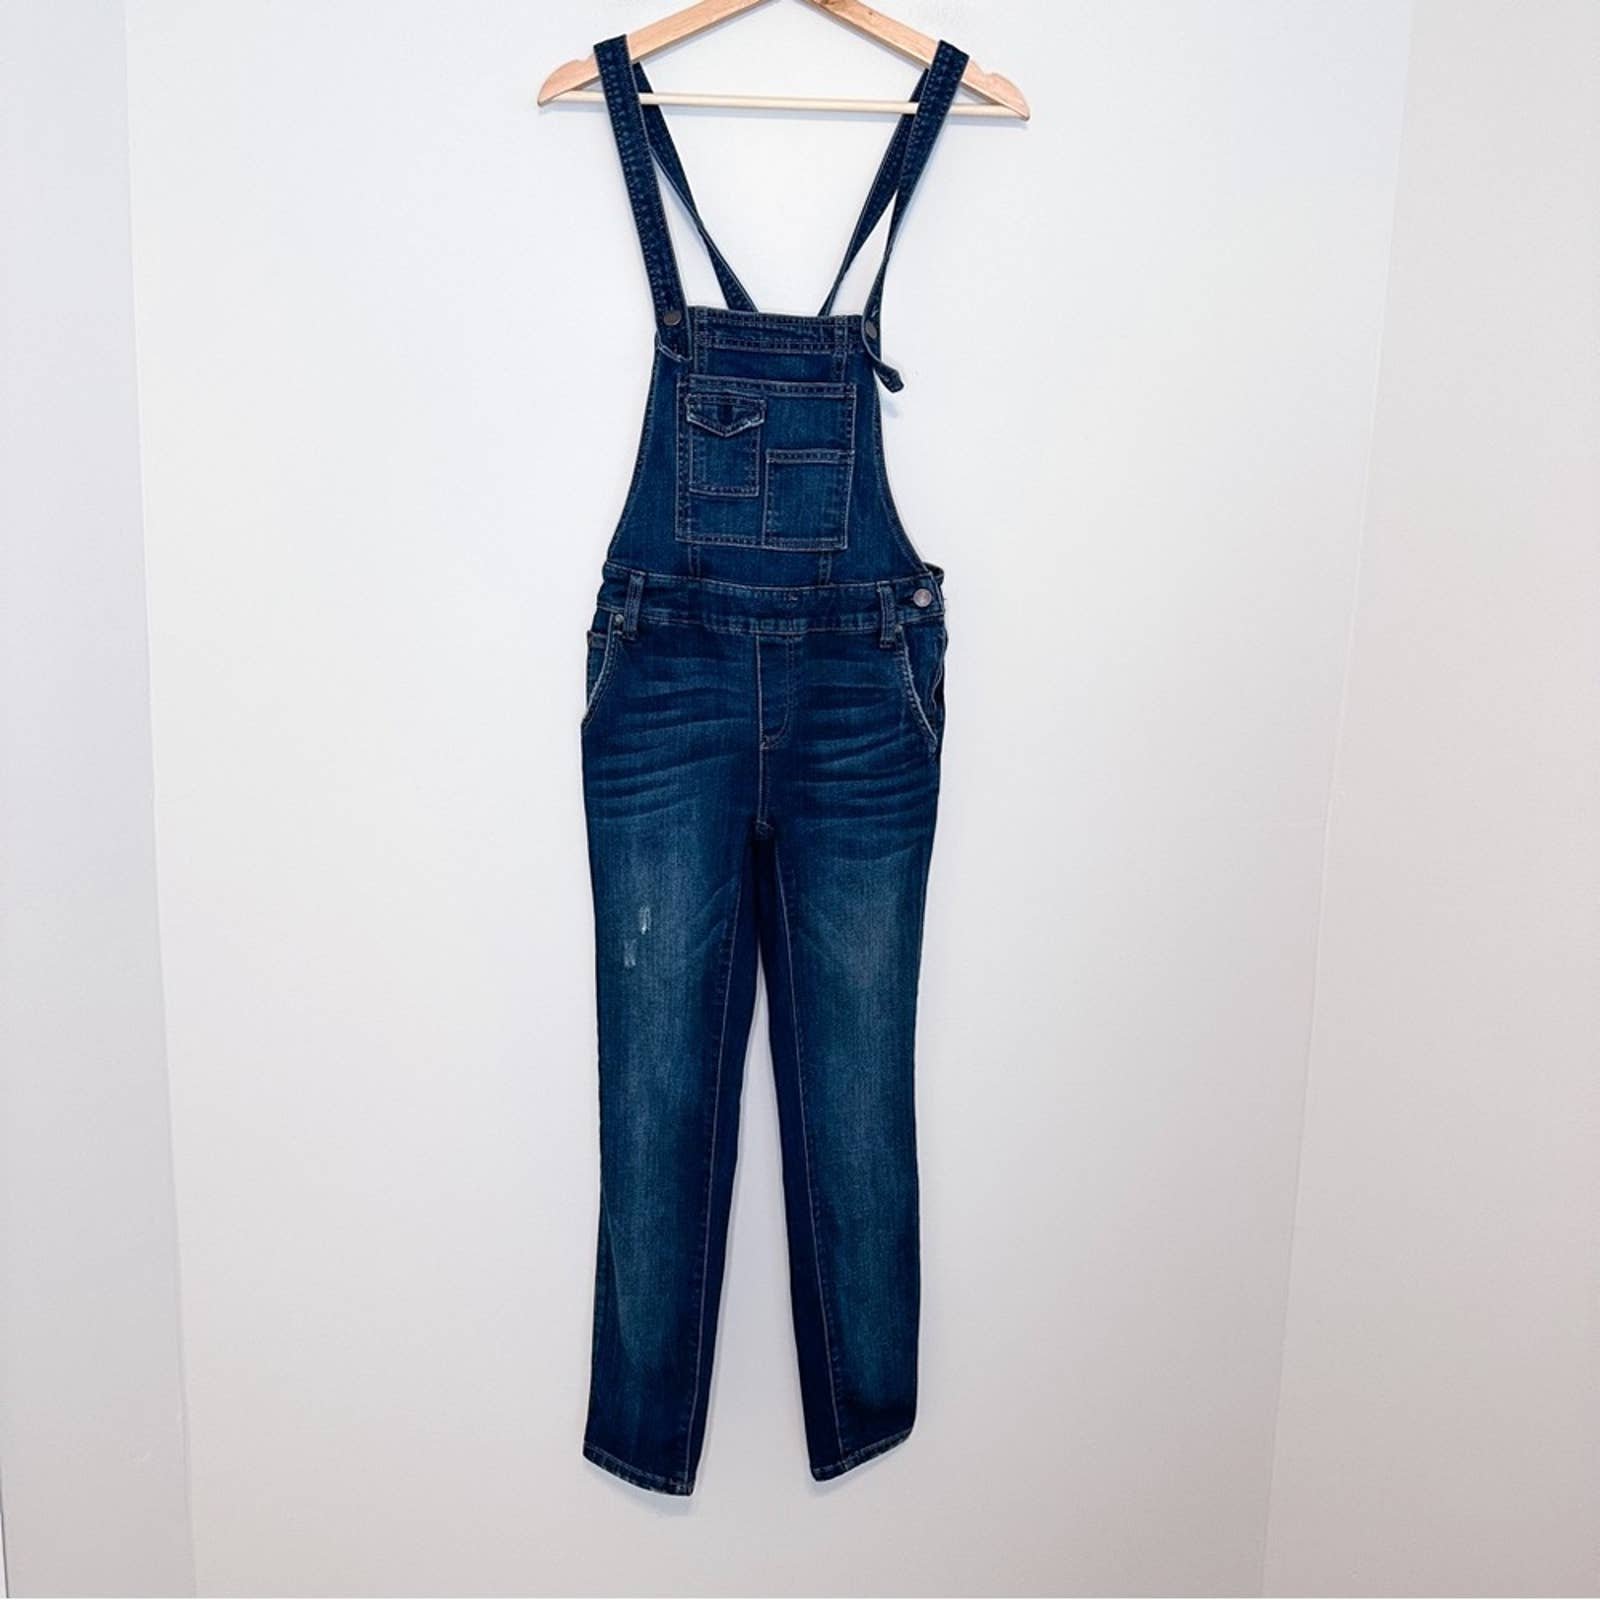 cheapest place to buy  Free People Overalls Jv3EFB4gz C